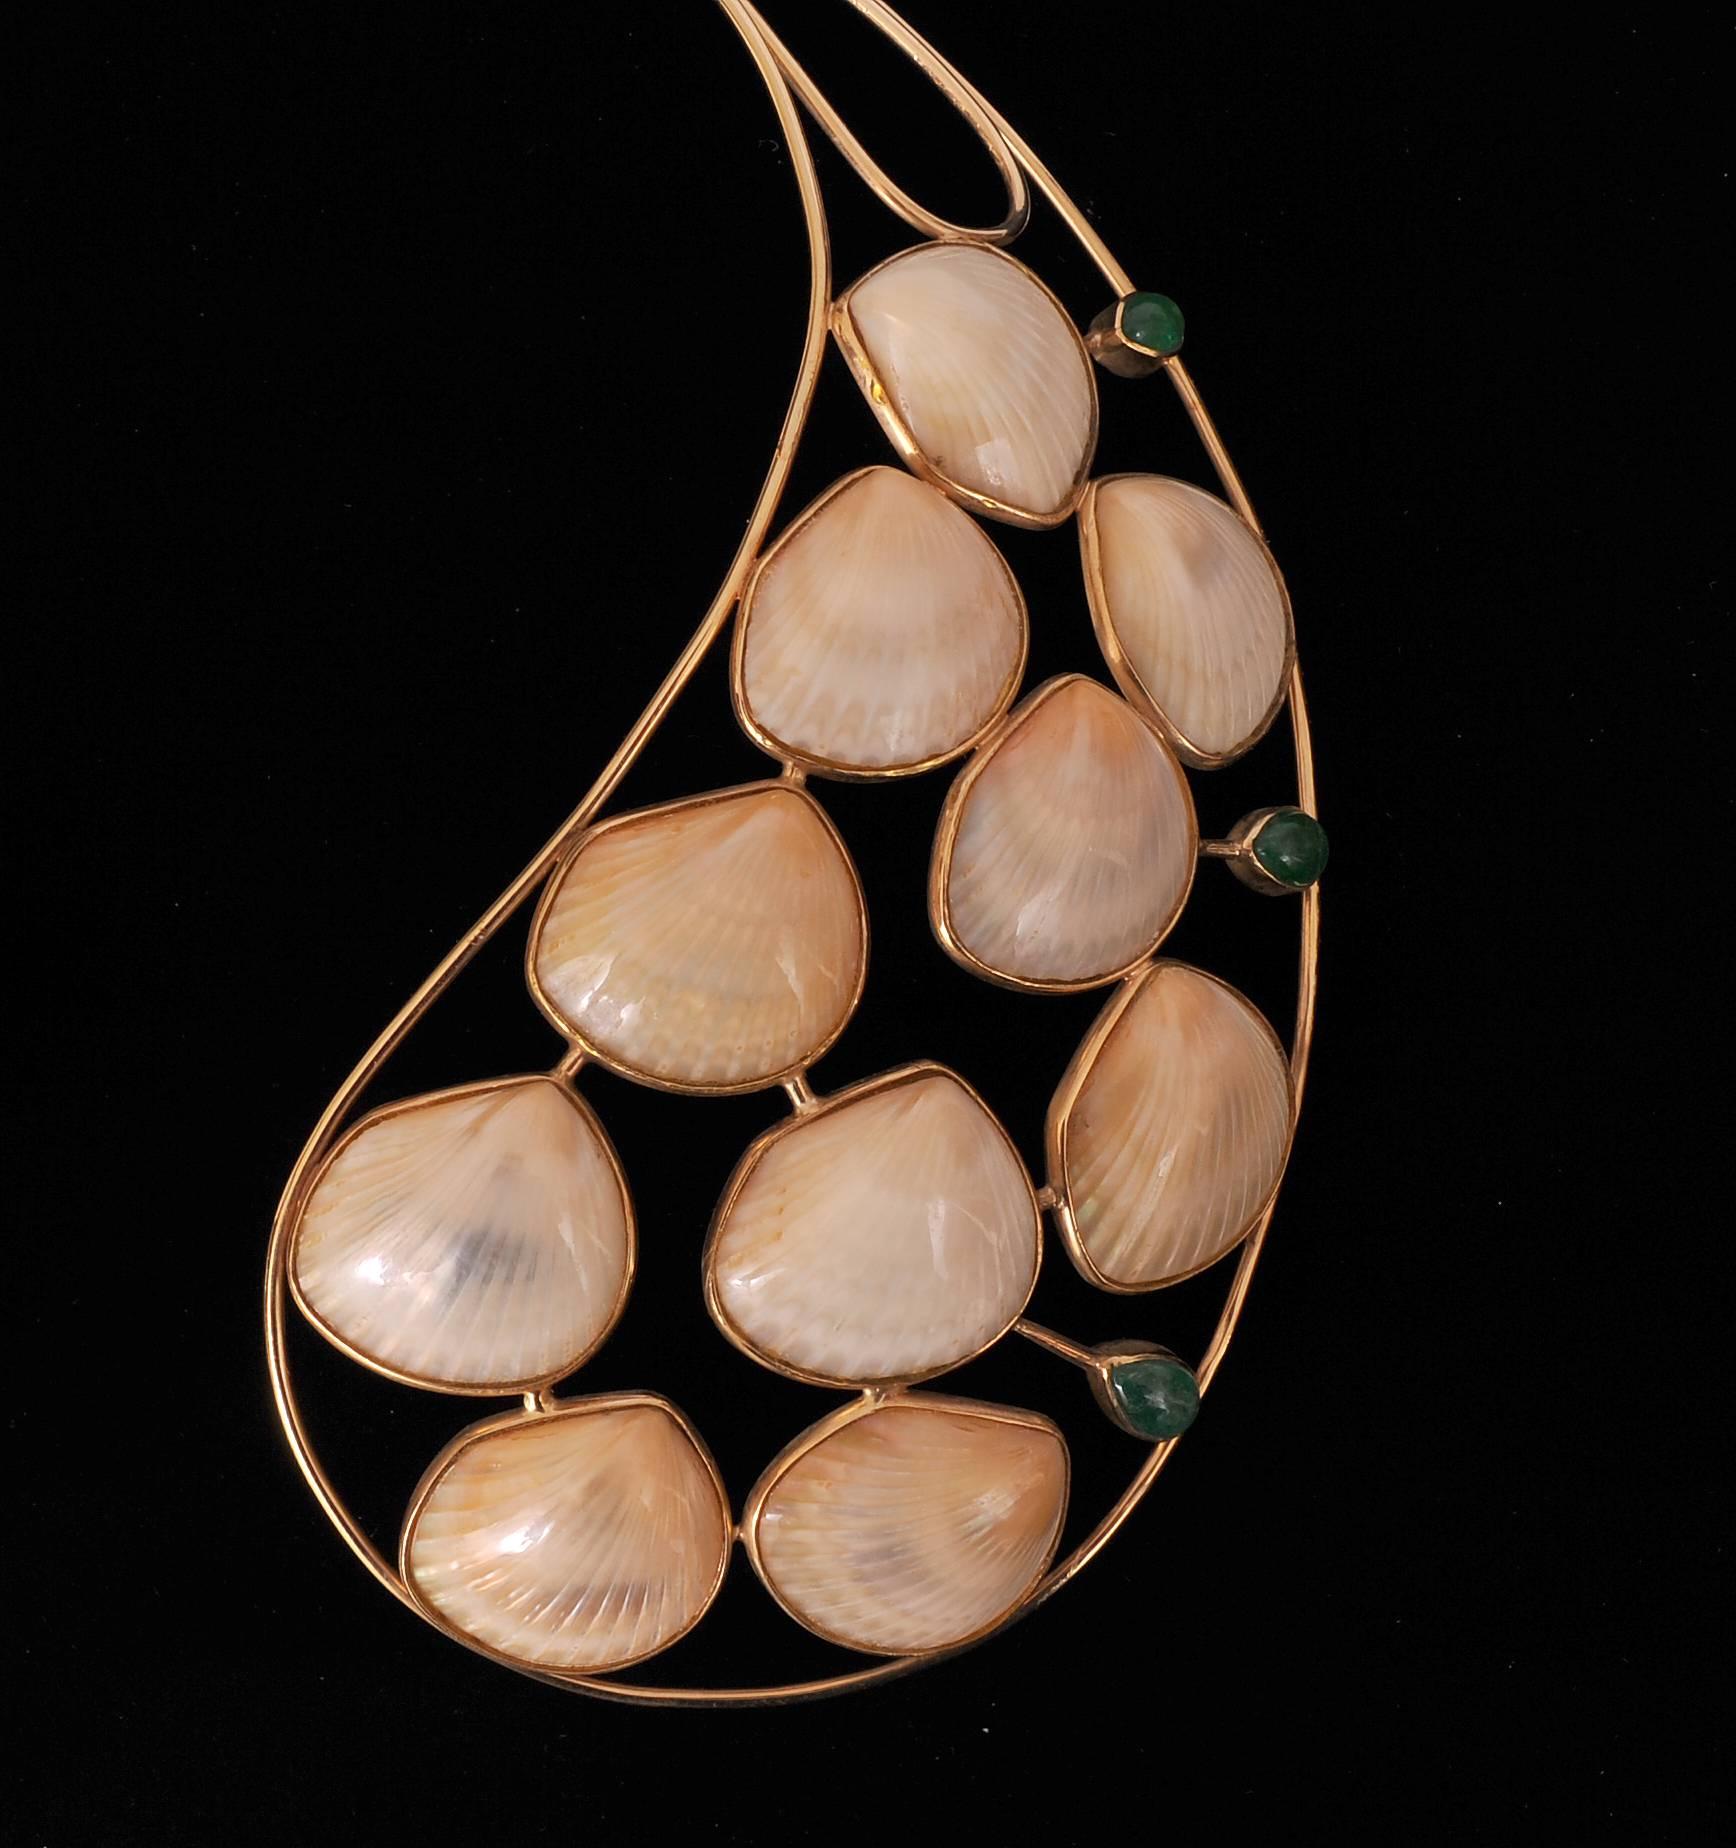 This striking piece of jewelry is a true work of art designed by Marguerite Stix in 1970. The collar shaped necklace has ten shells on each side edged with gold. Three cabochon emeralds add color to each side and the whole shell element is